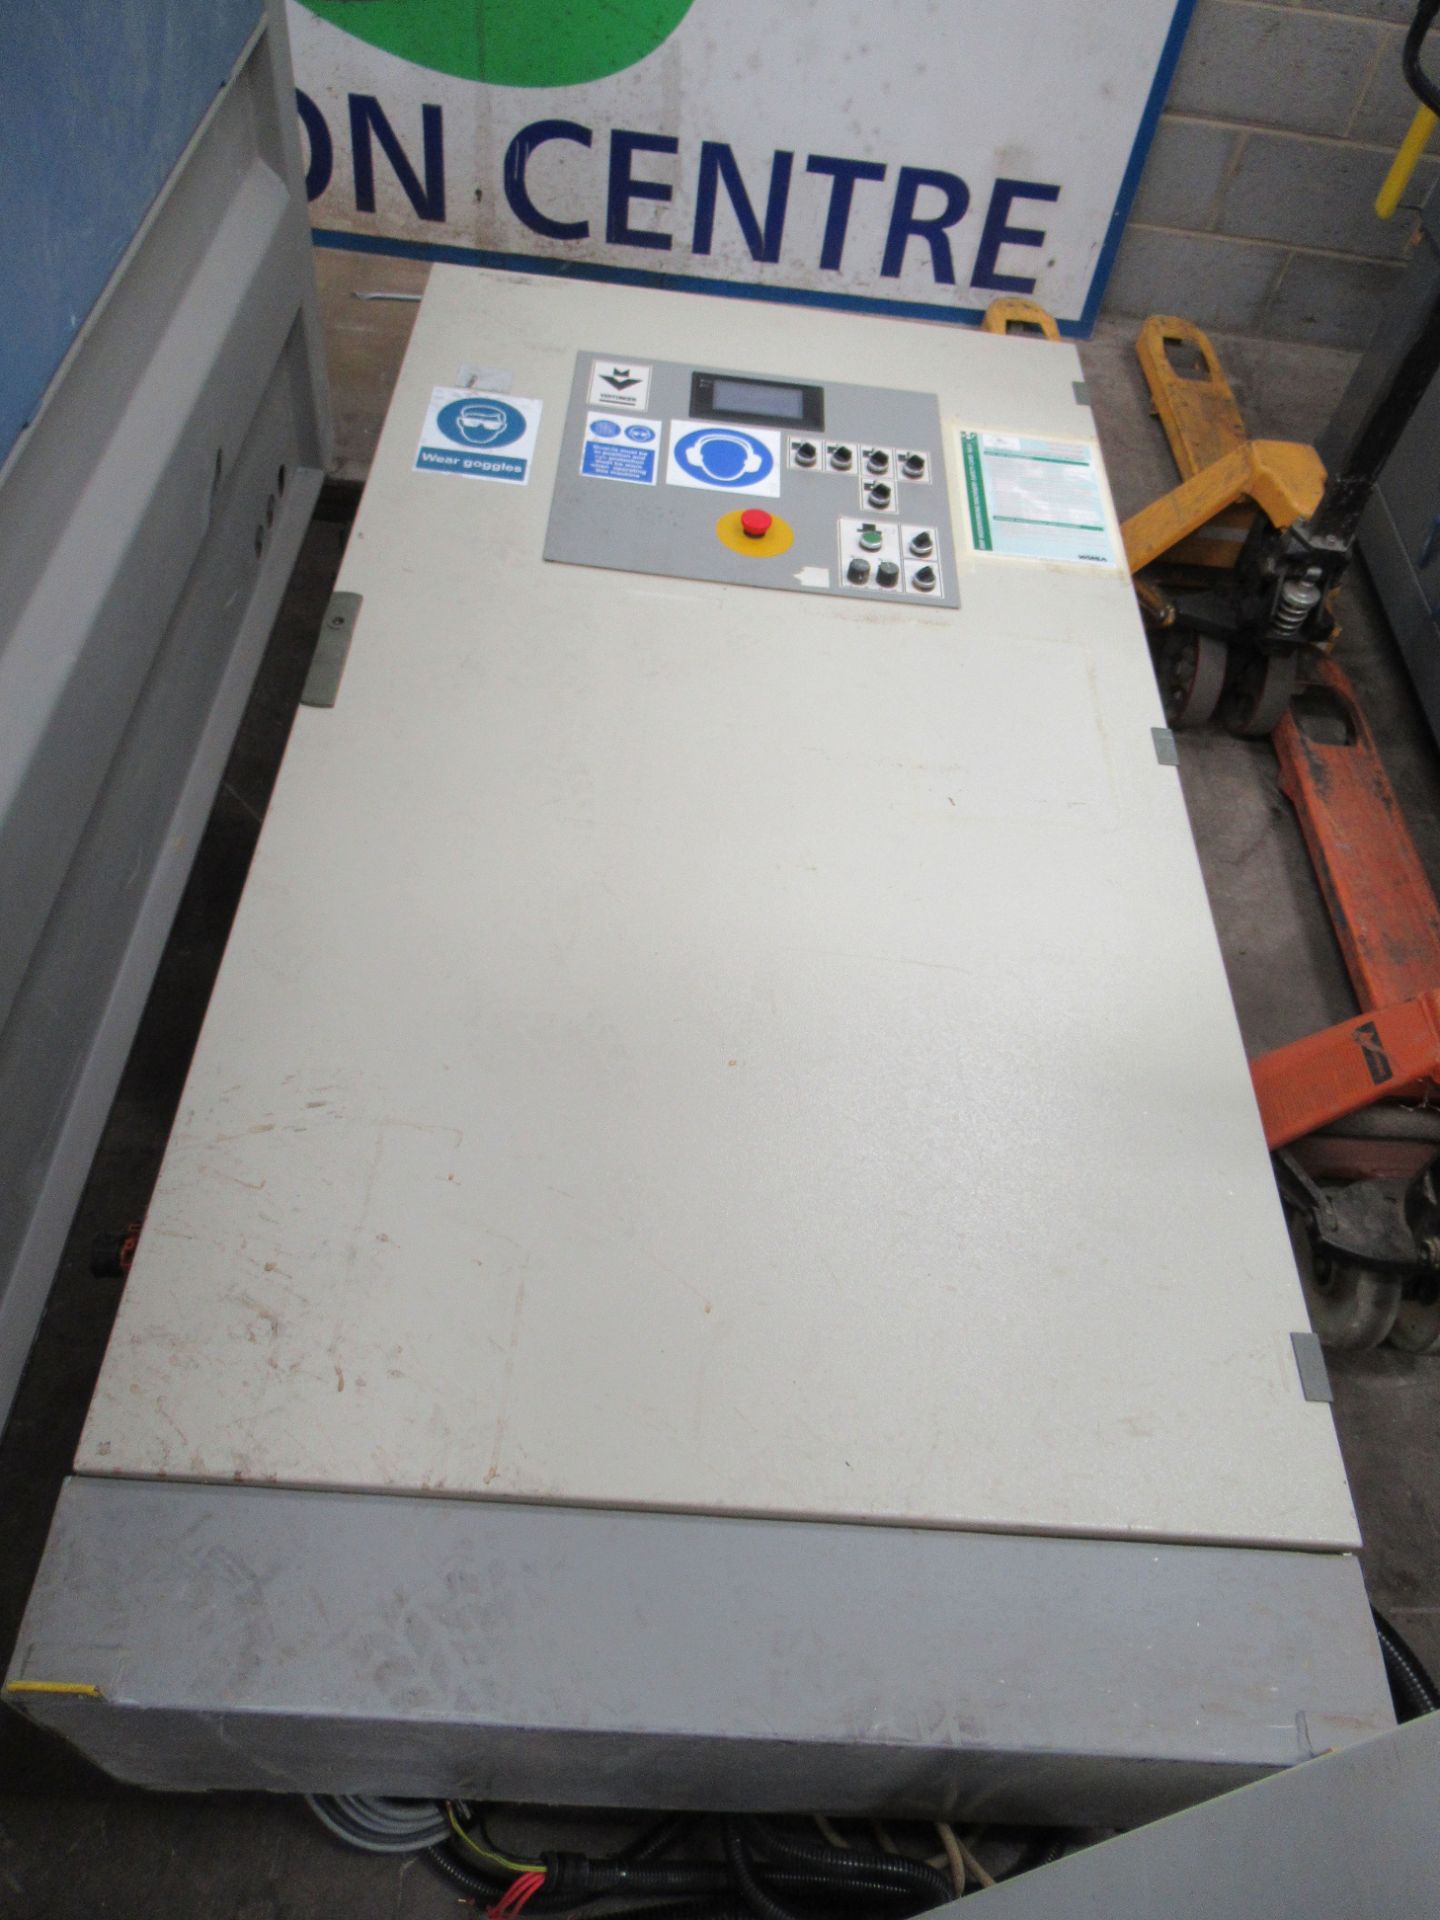 Vertongen Pentho4 Tenoning Machine together with a control panel. - Image 8 of 9